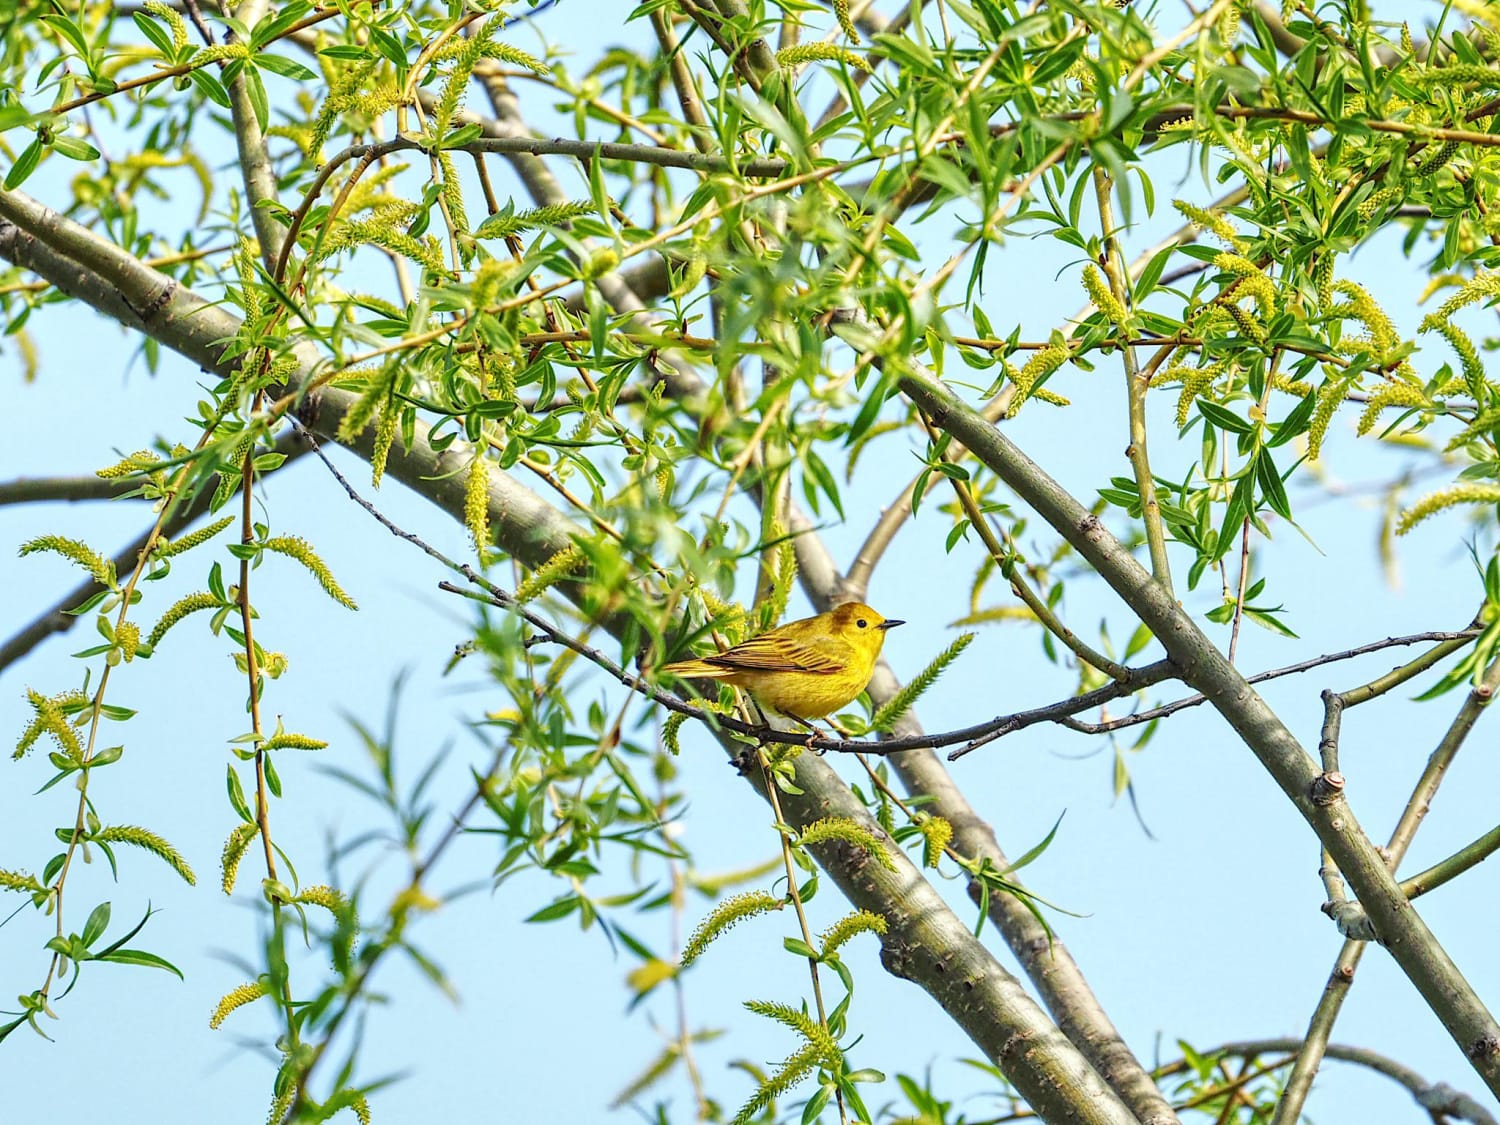 So much joy from one little bird: the Yellow Warbler.